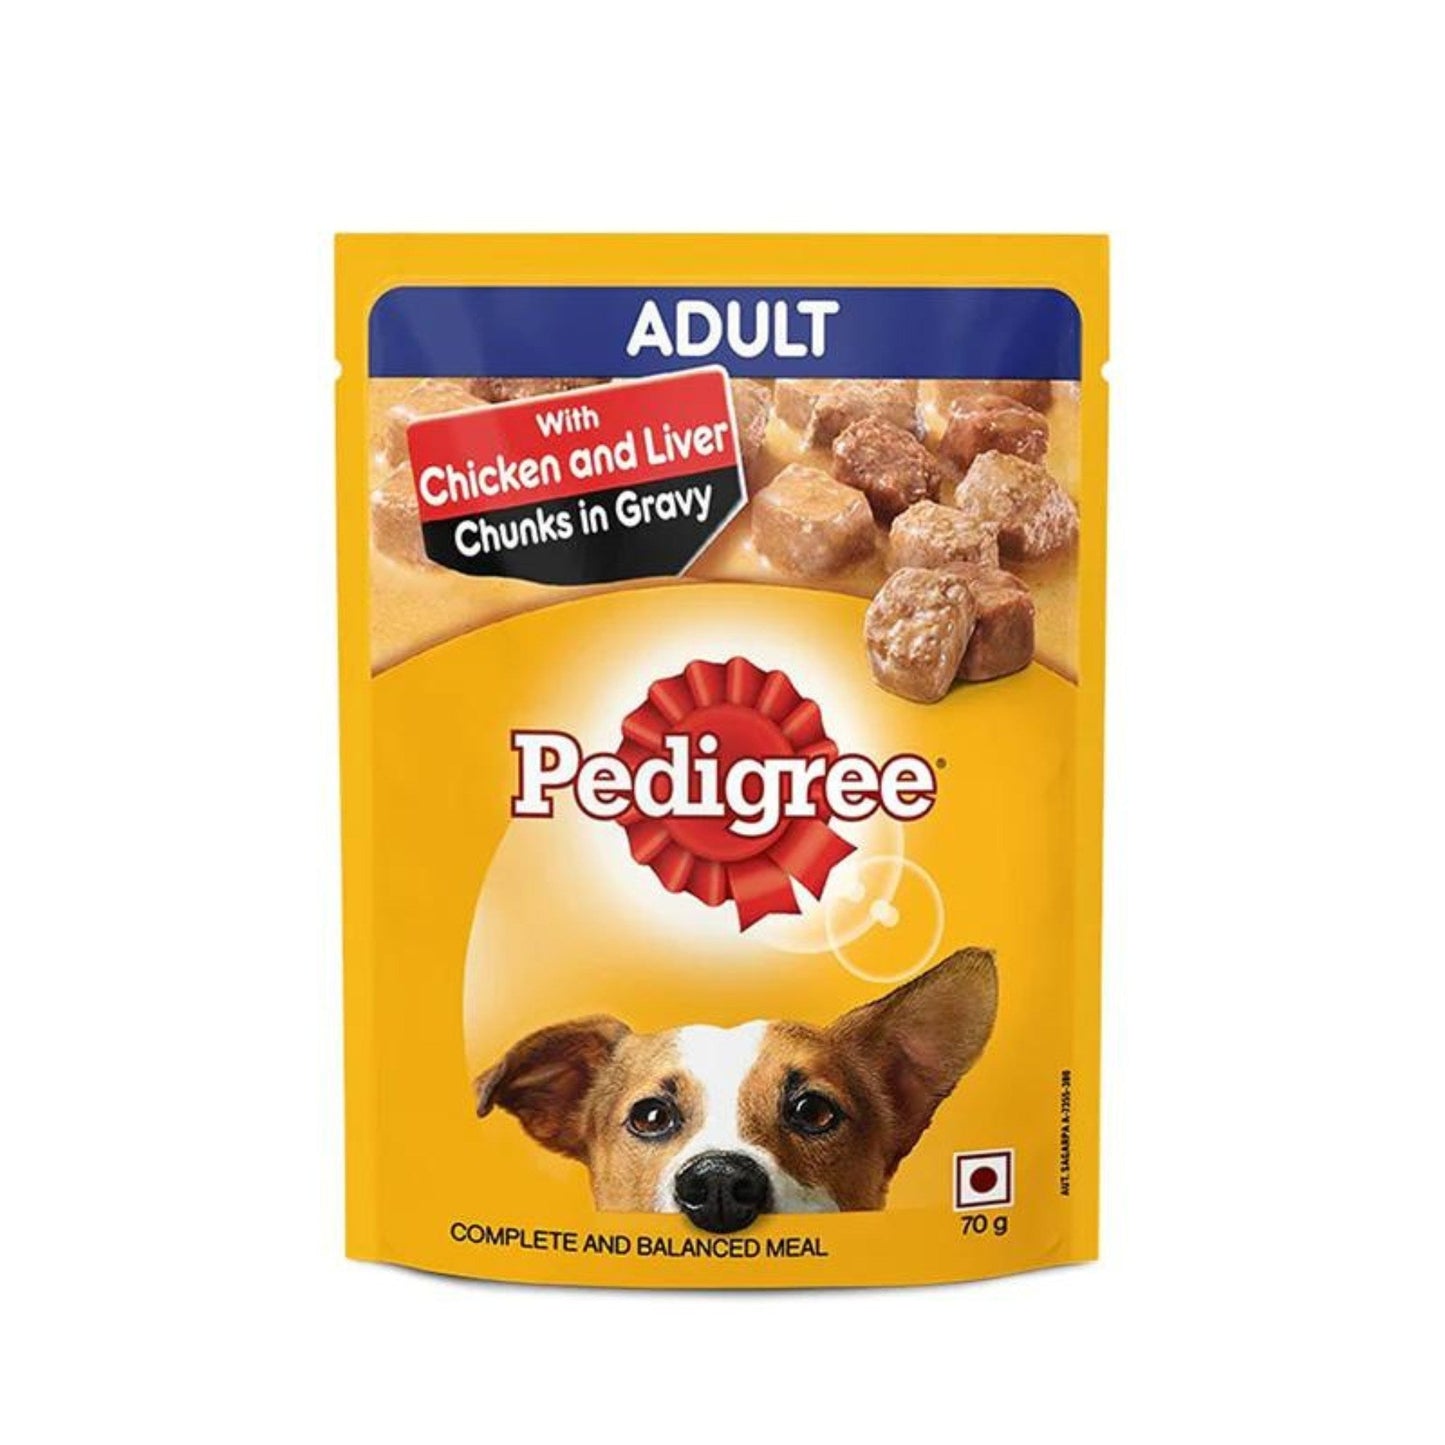 Pedigree Adult Dog Food, Chicken and liver Chunks in Gravy, Pack of 30